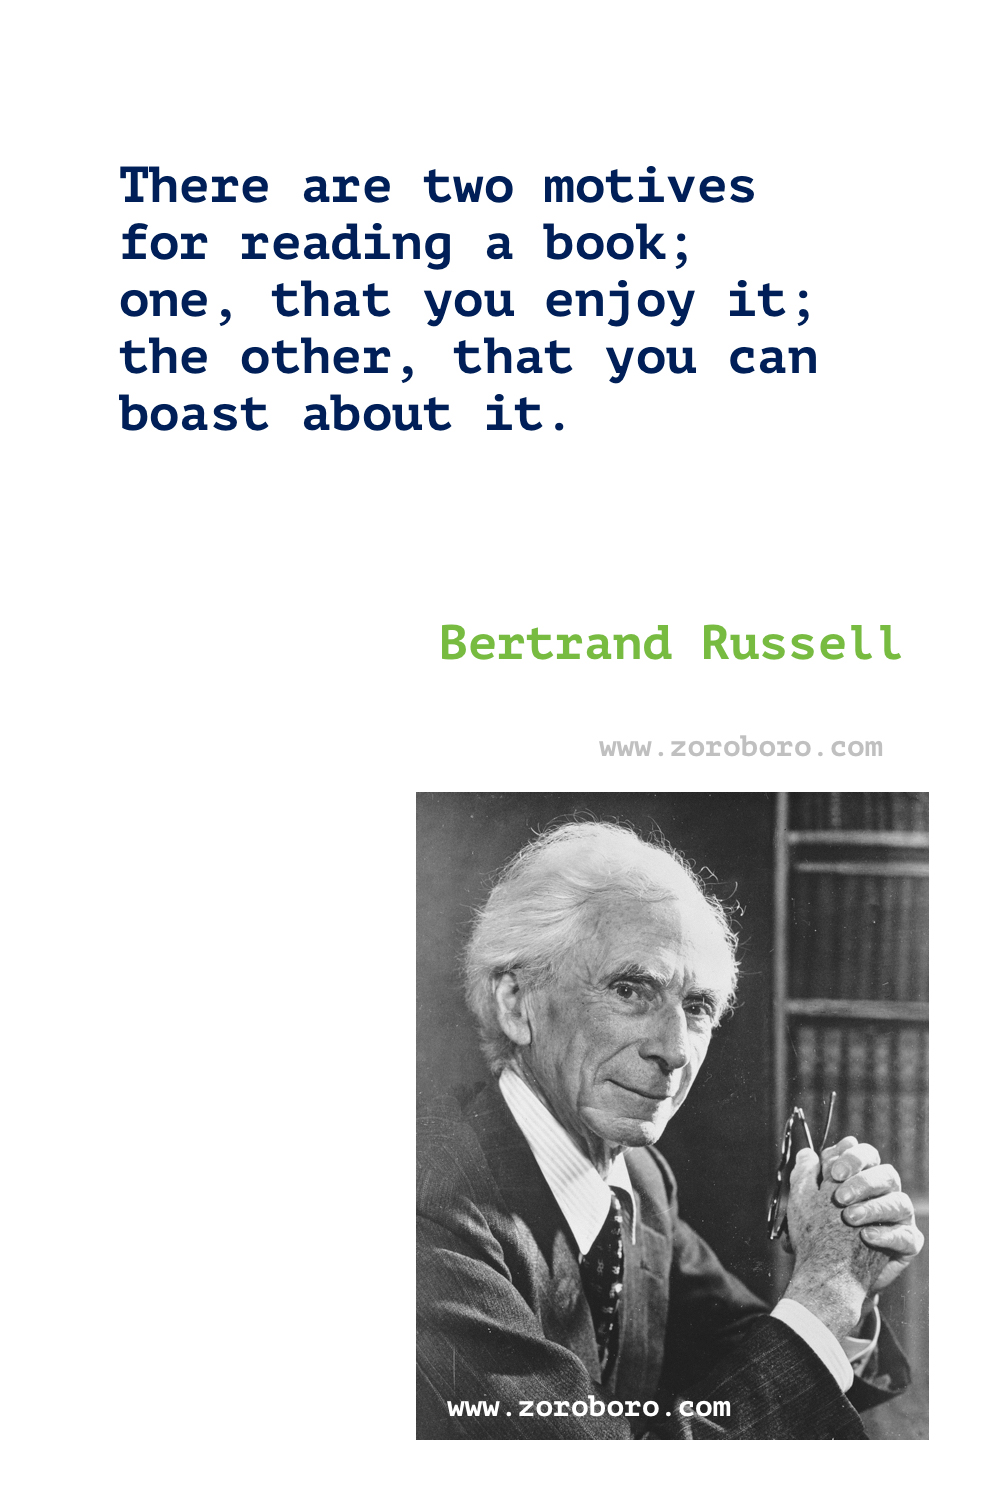 Bertrand Russell Quotes. Bertrand Russell Books, Essay Quotes. Bertrand Russell 10 commandments. Bertrand Russell Philosophy. Bertrand Russell Love, Happiness, Science, Human, Psychology & Religion Quotes. Bertrand Russell,Bertrand Russell's Books Quotes - The Problems of Philosophy, A History of Western Philosophy, The Conquest of Happiness, Marriage and Morals, Sceptical Essays, Unpopular, & Why Men Fight